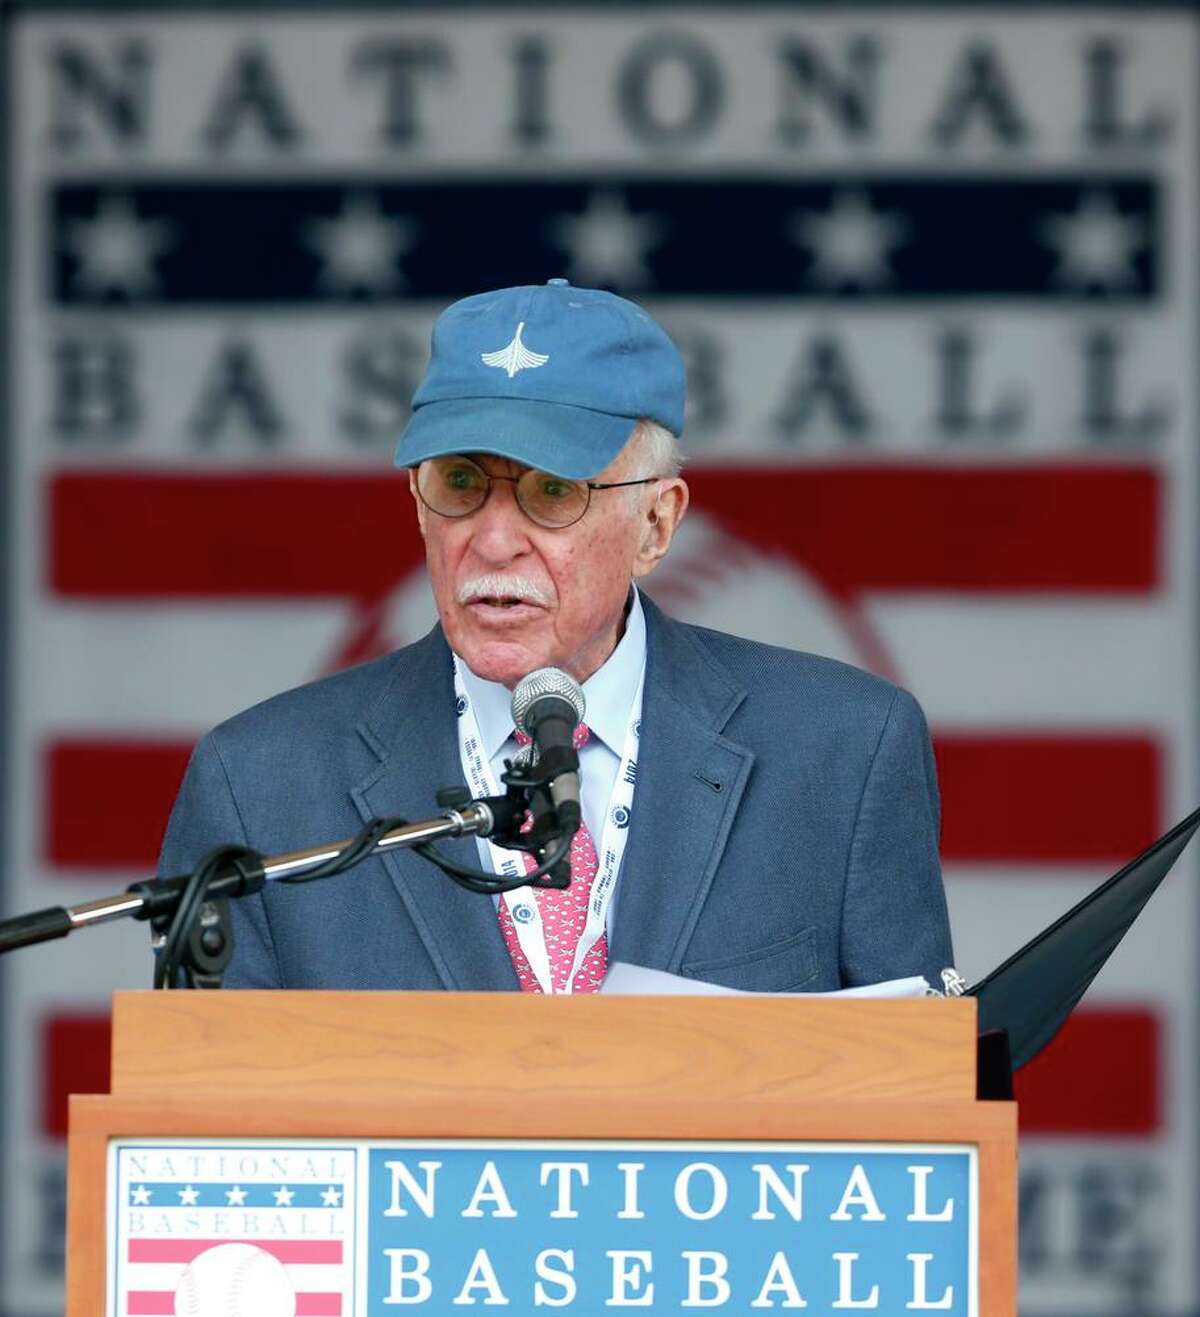 Roger Angell speaks in Cooperstown, N.Y., after receiving the Baseball Hall of Fame’s J.G. Taylor Spink Award in 2014.